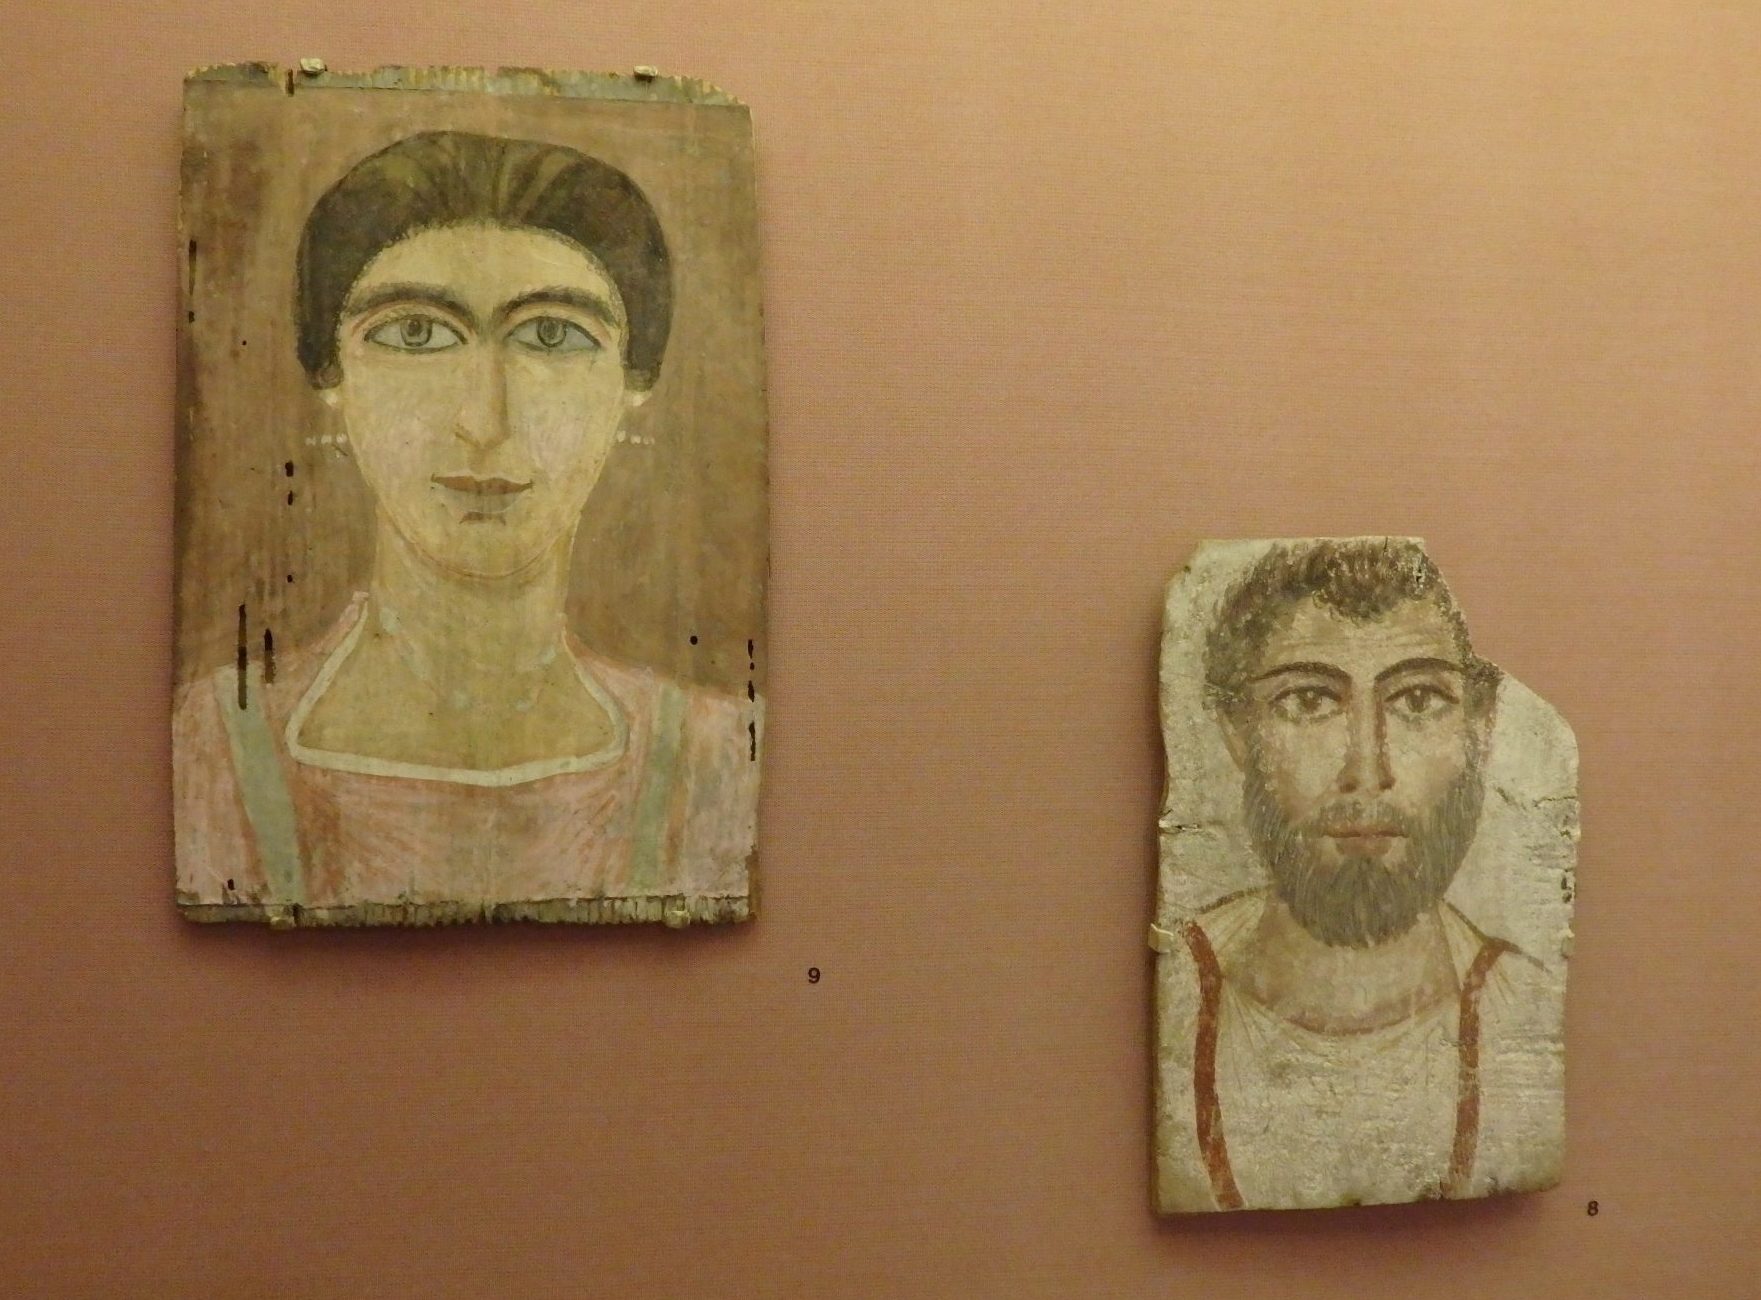 Early Christian-era mummy portraits painted on wood. The one on the right is from ca. 270-330 CE, while the left-hand portrait is from ca. 350 CE. Bible Lands Museum, Jerusalem, Israel